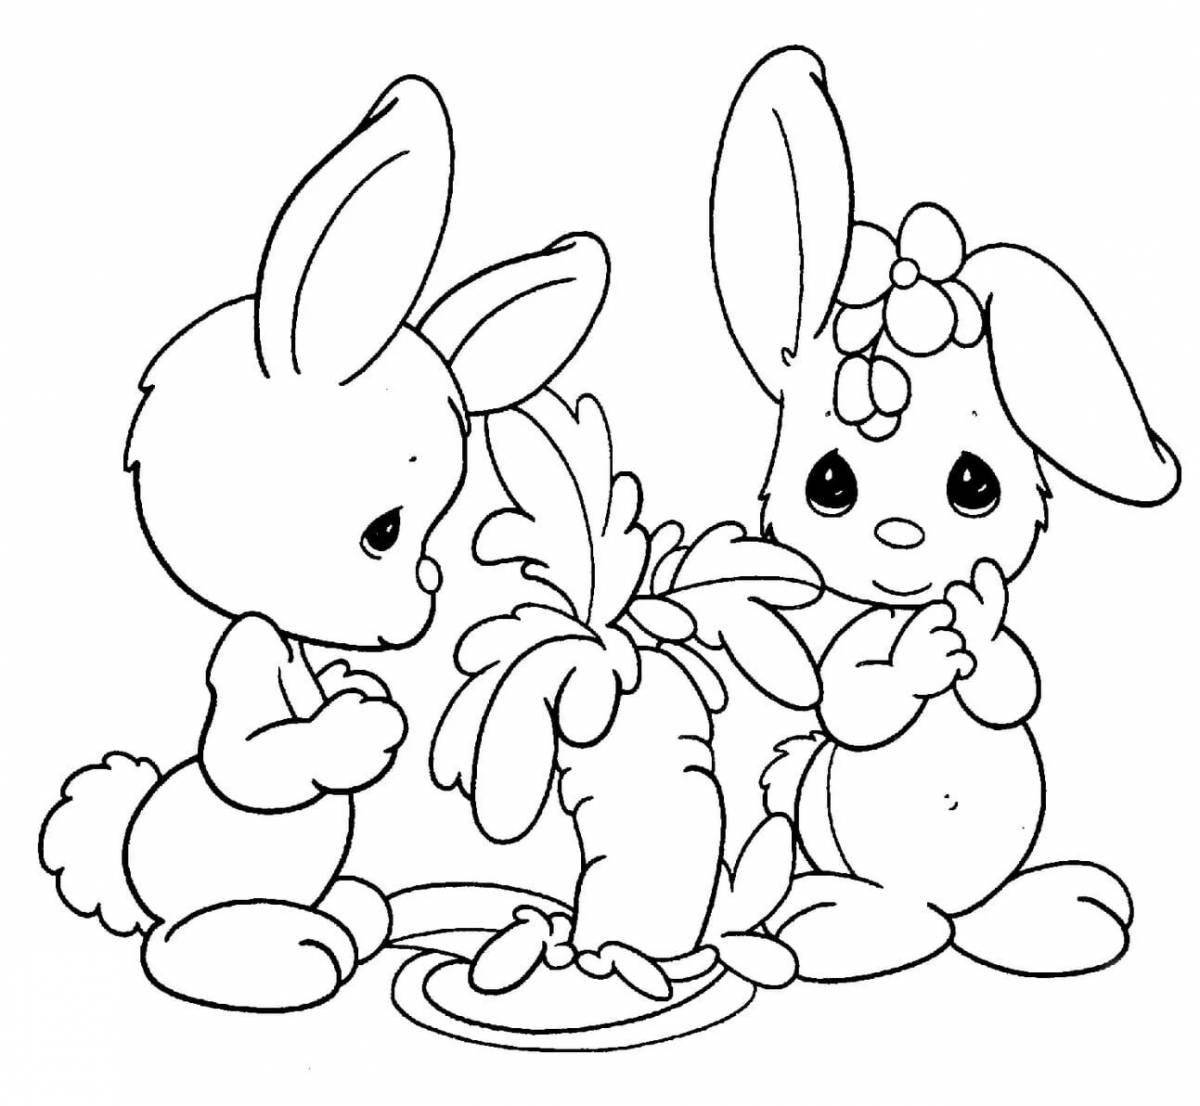 Naughty coloring pages little rabbits